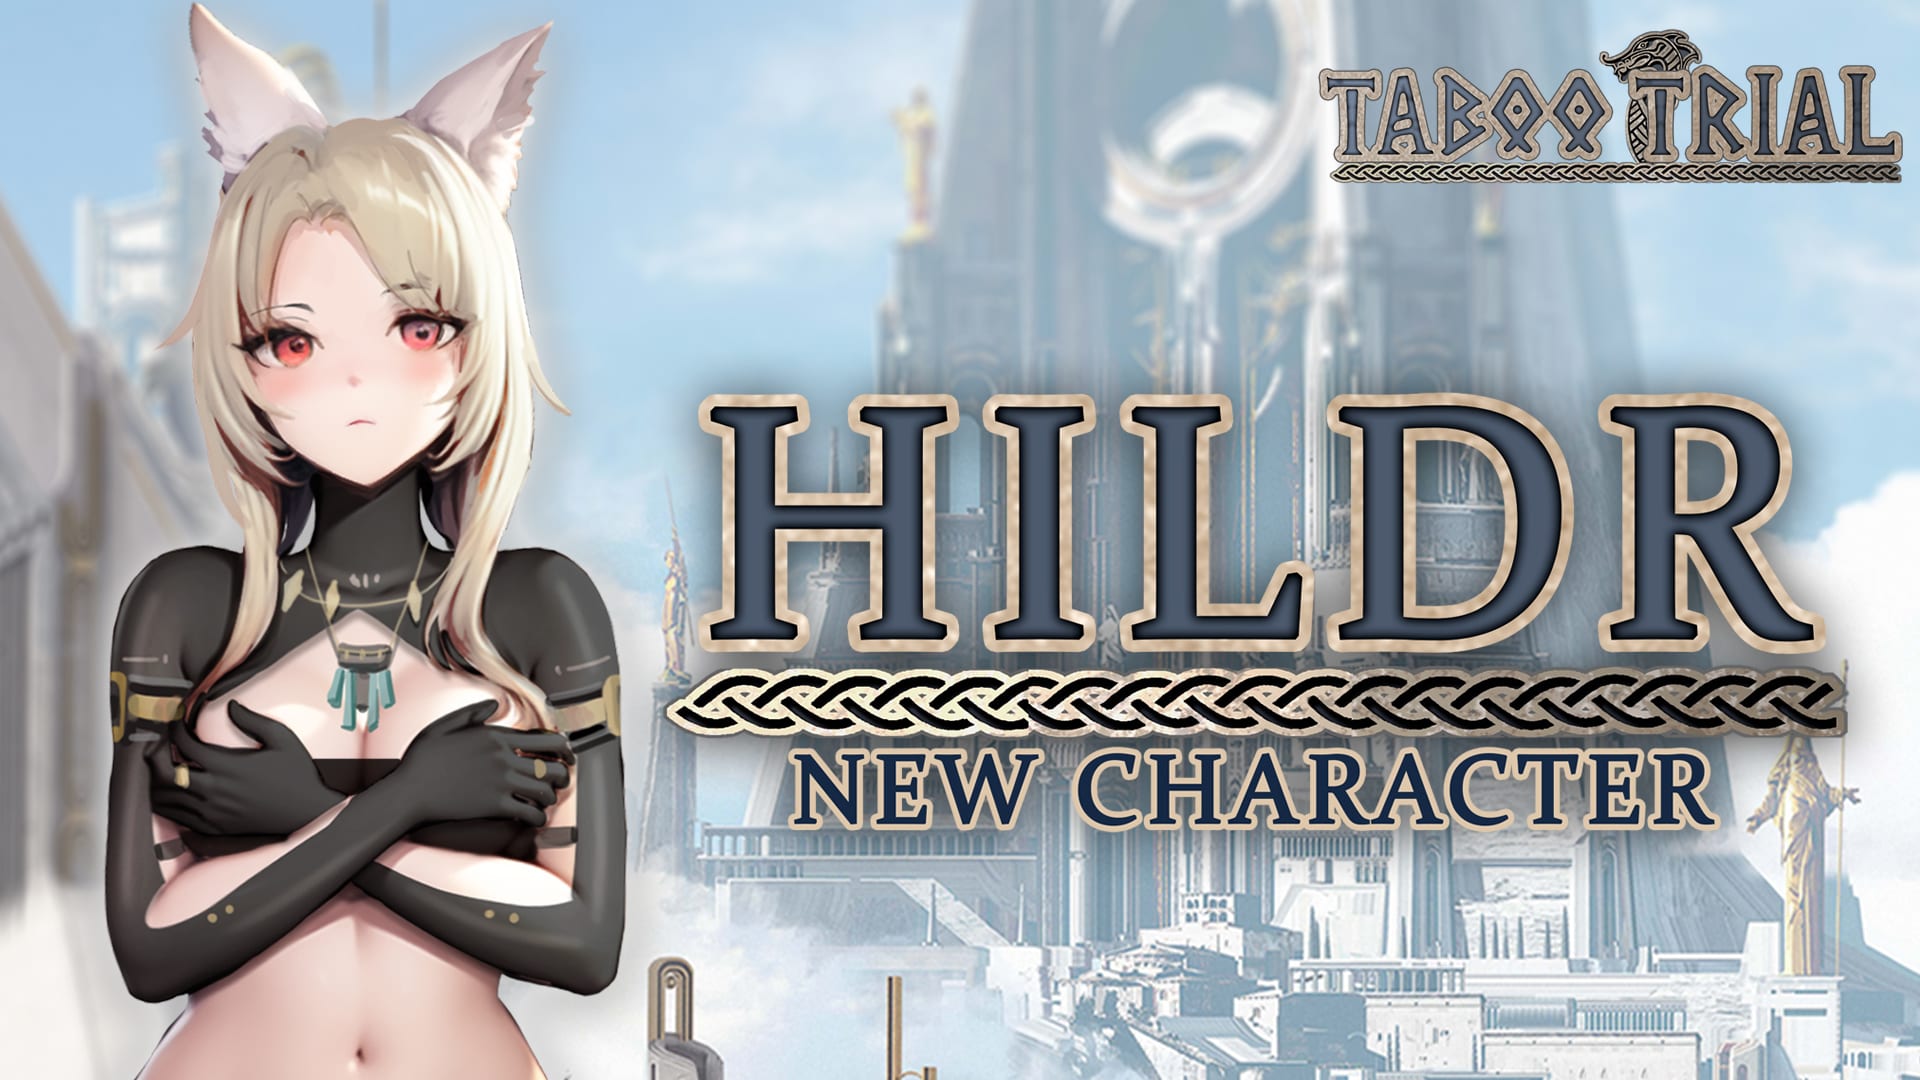 New Character: Hildr